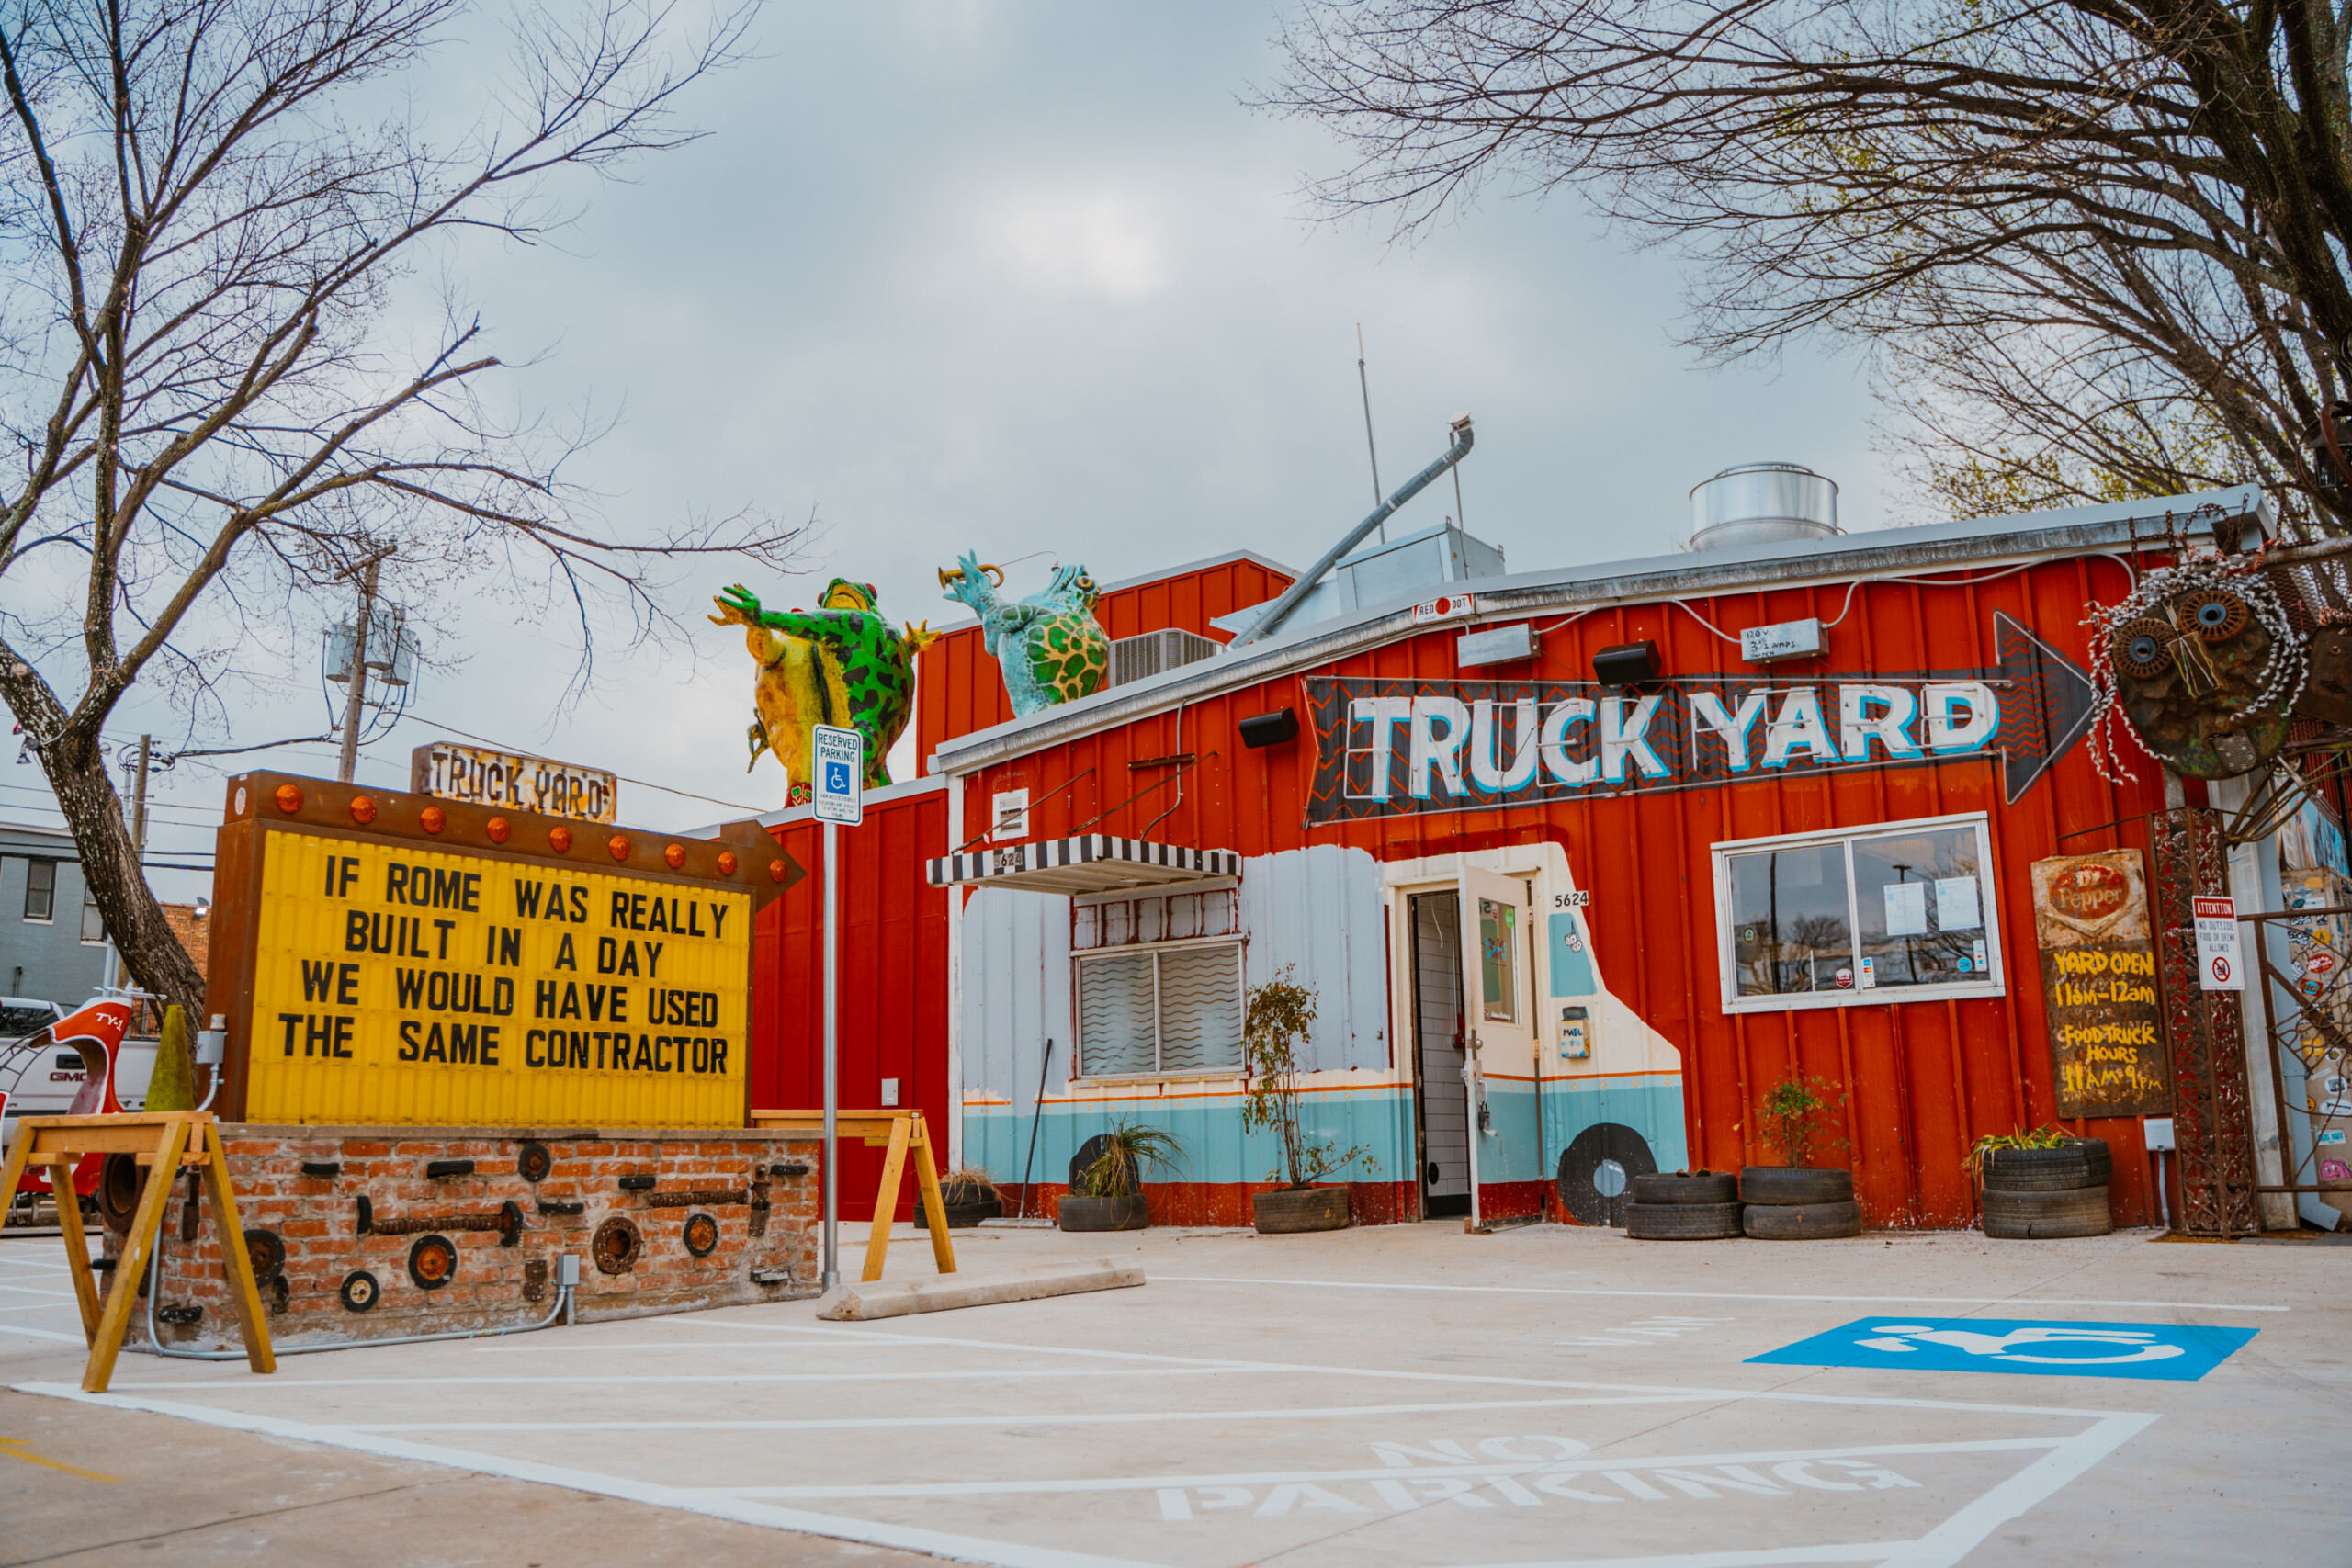 News bits: Truck Yard reopens after $2 million renovation and Sandwich Hag starts a coffee shop